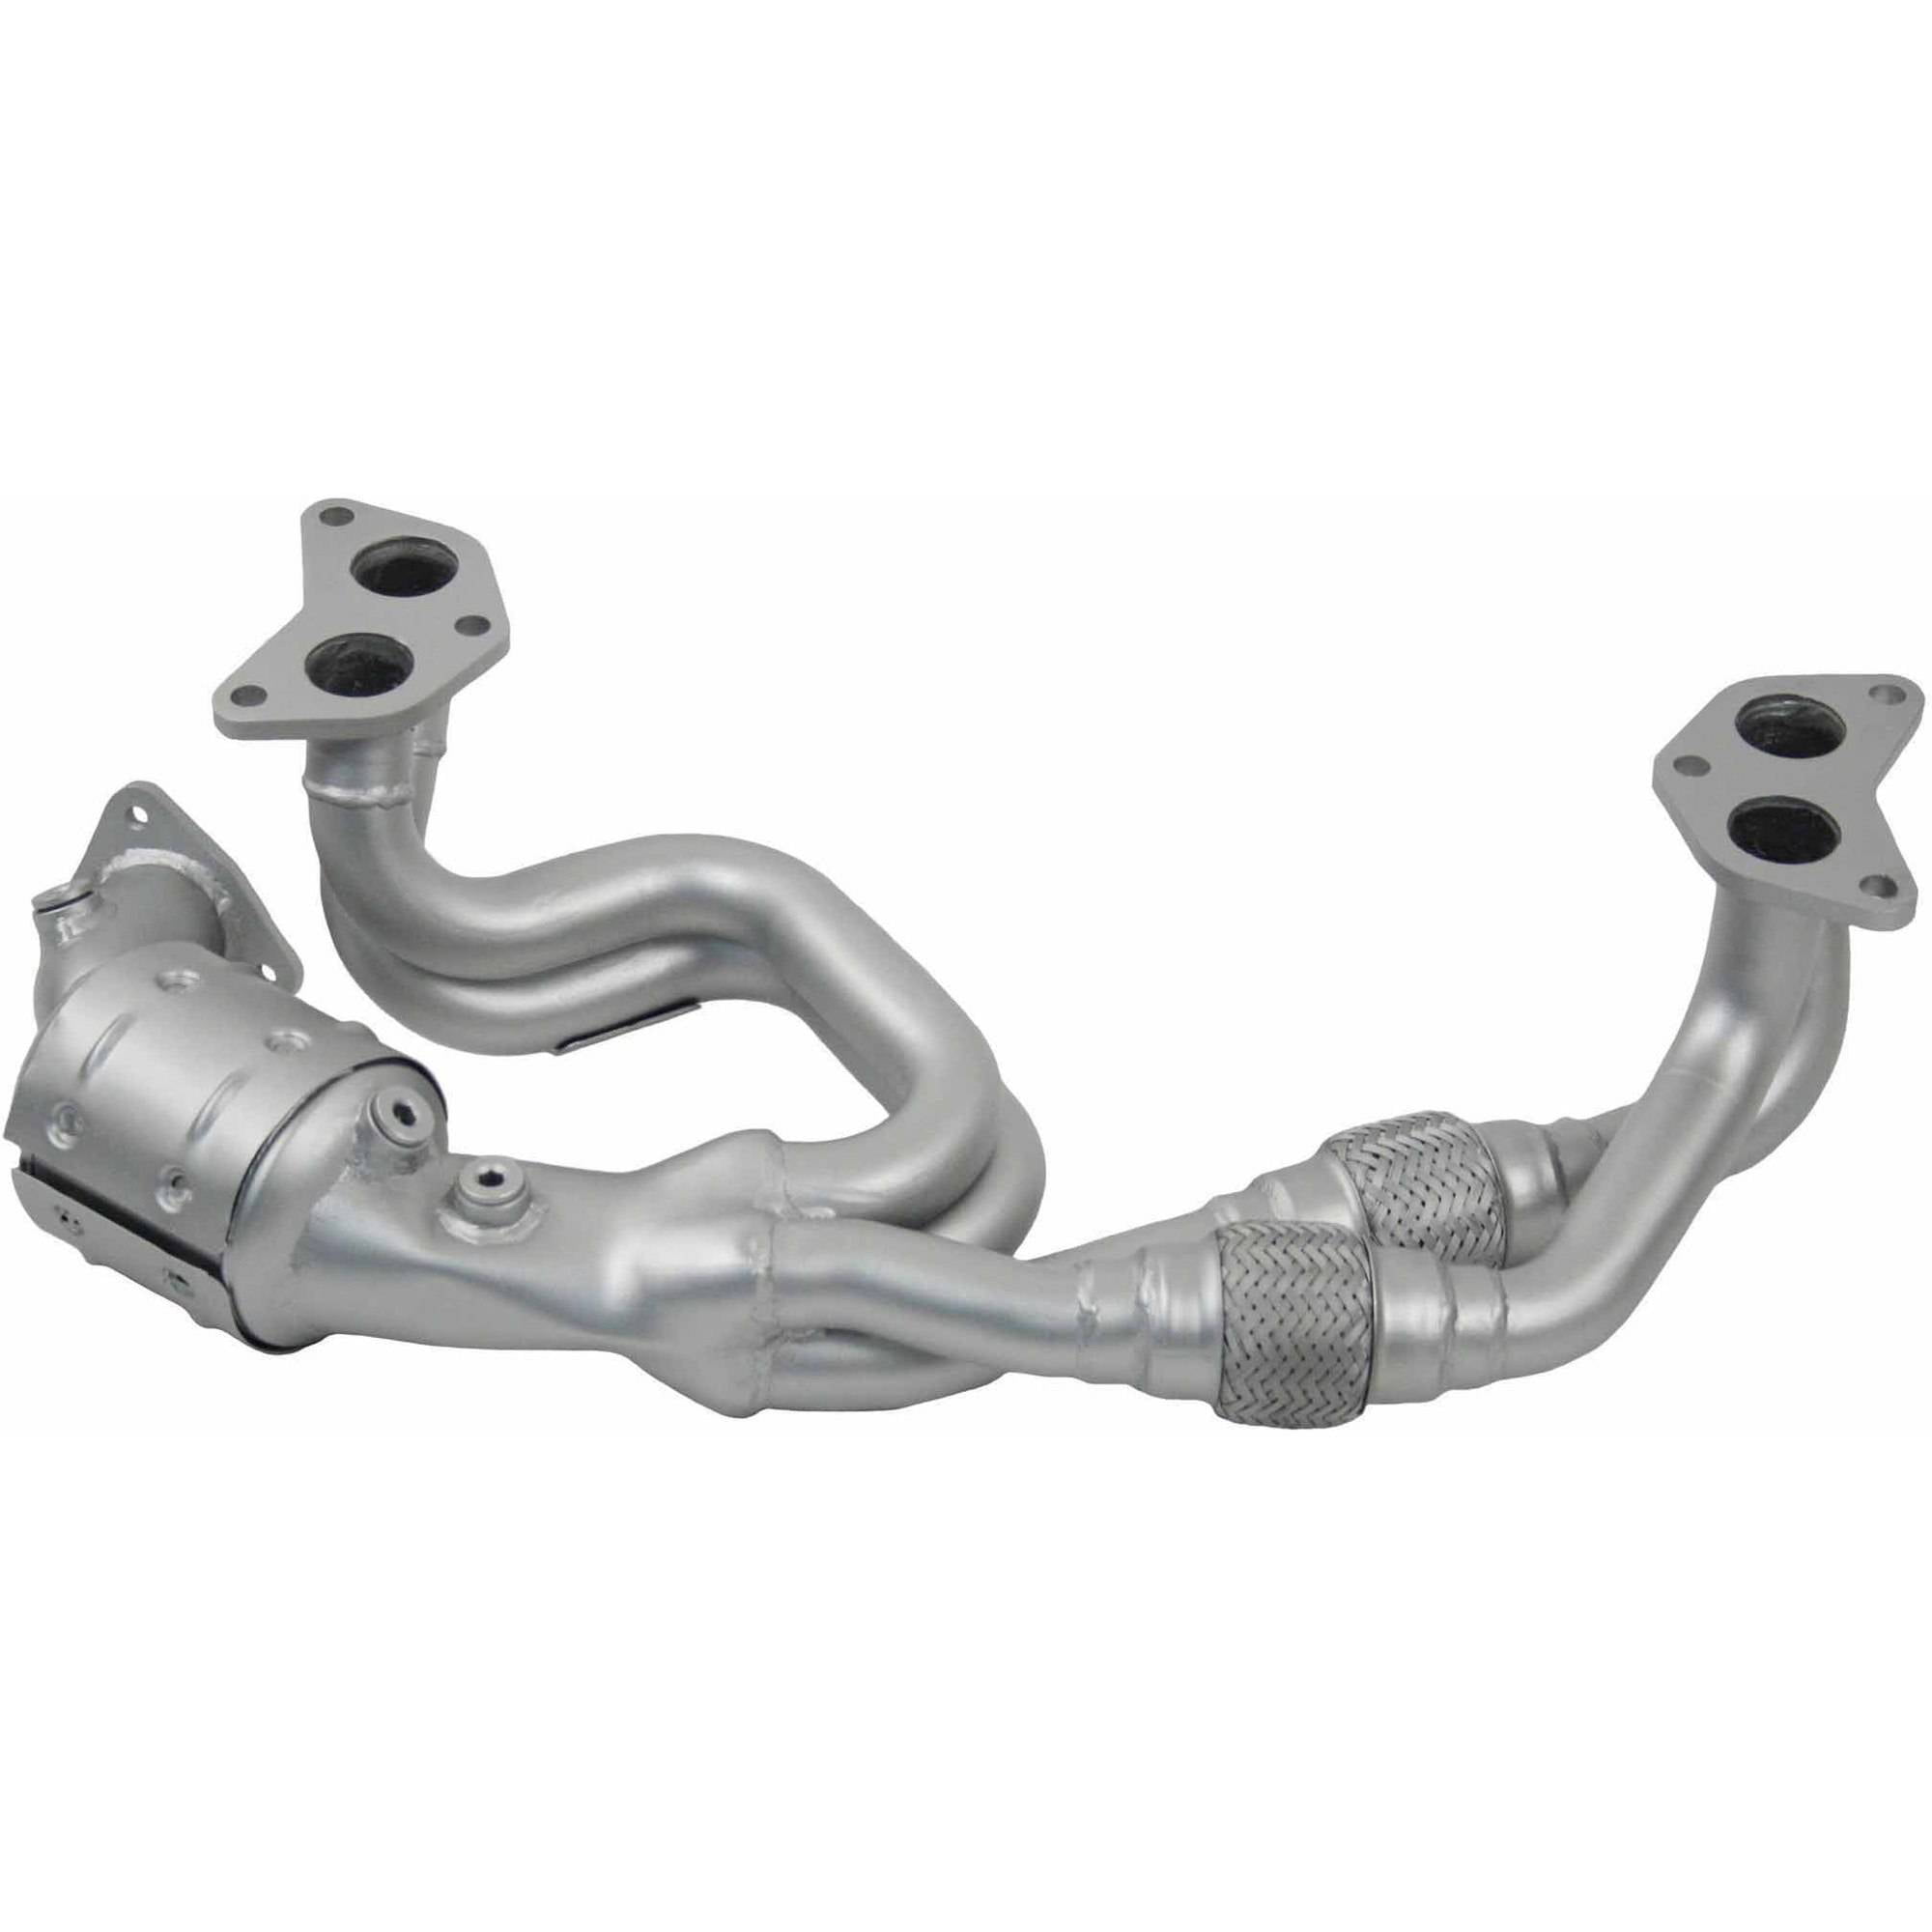 Non C.A.R.B.Compliant Catalytic Converter Nissan Altima 2007-to-2015 2.5L D-Fit